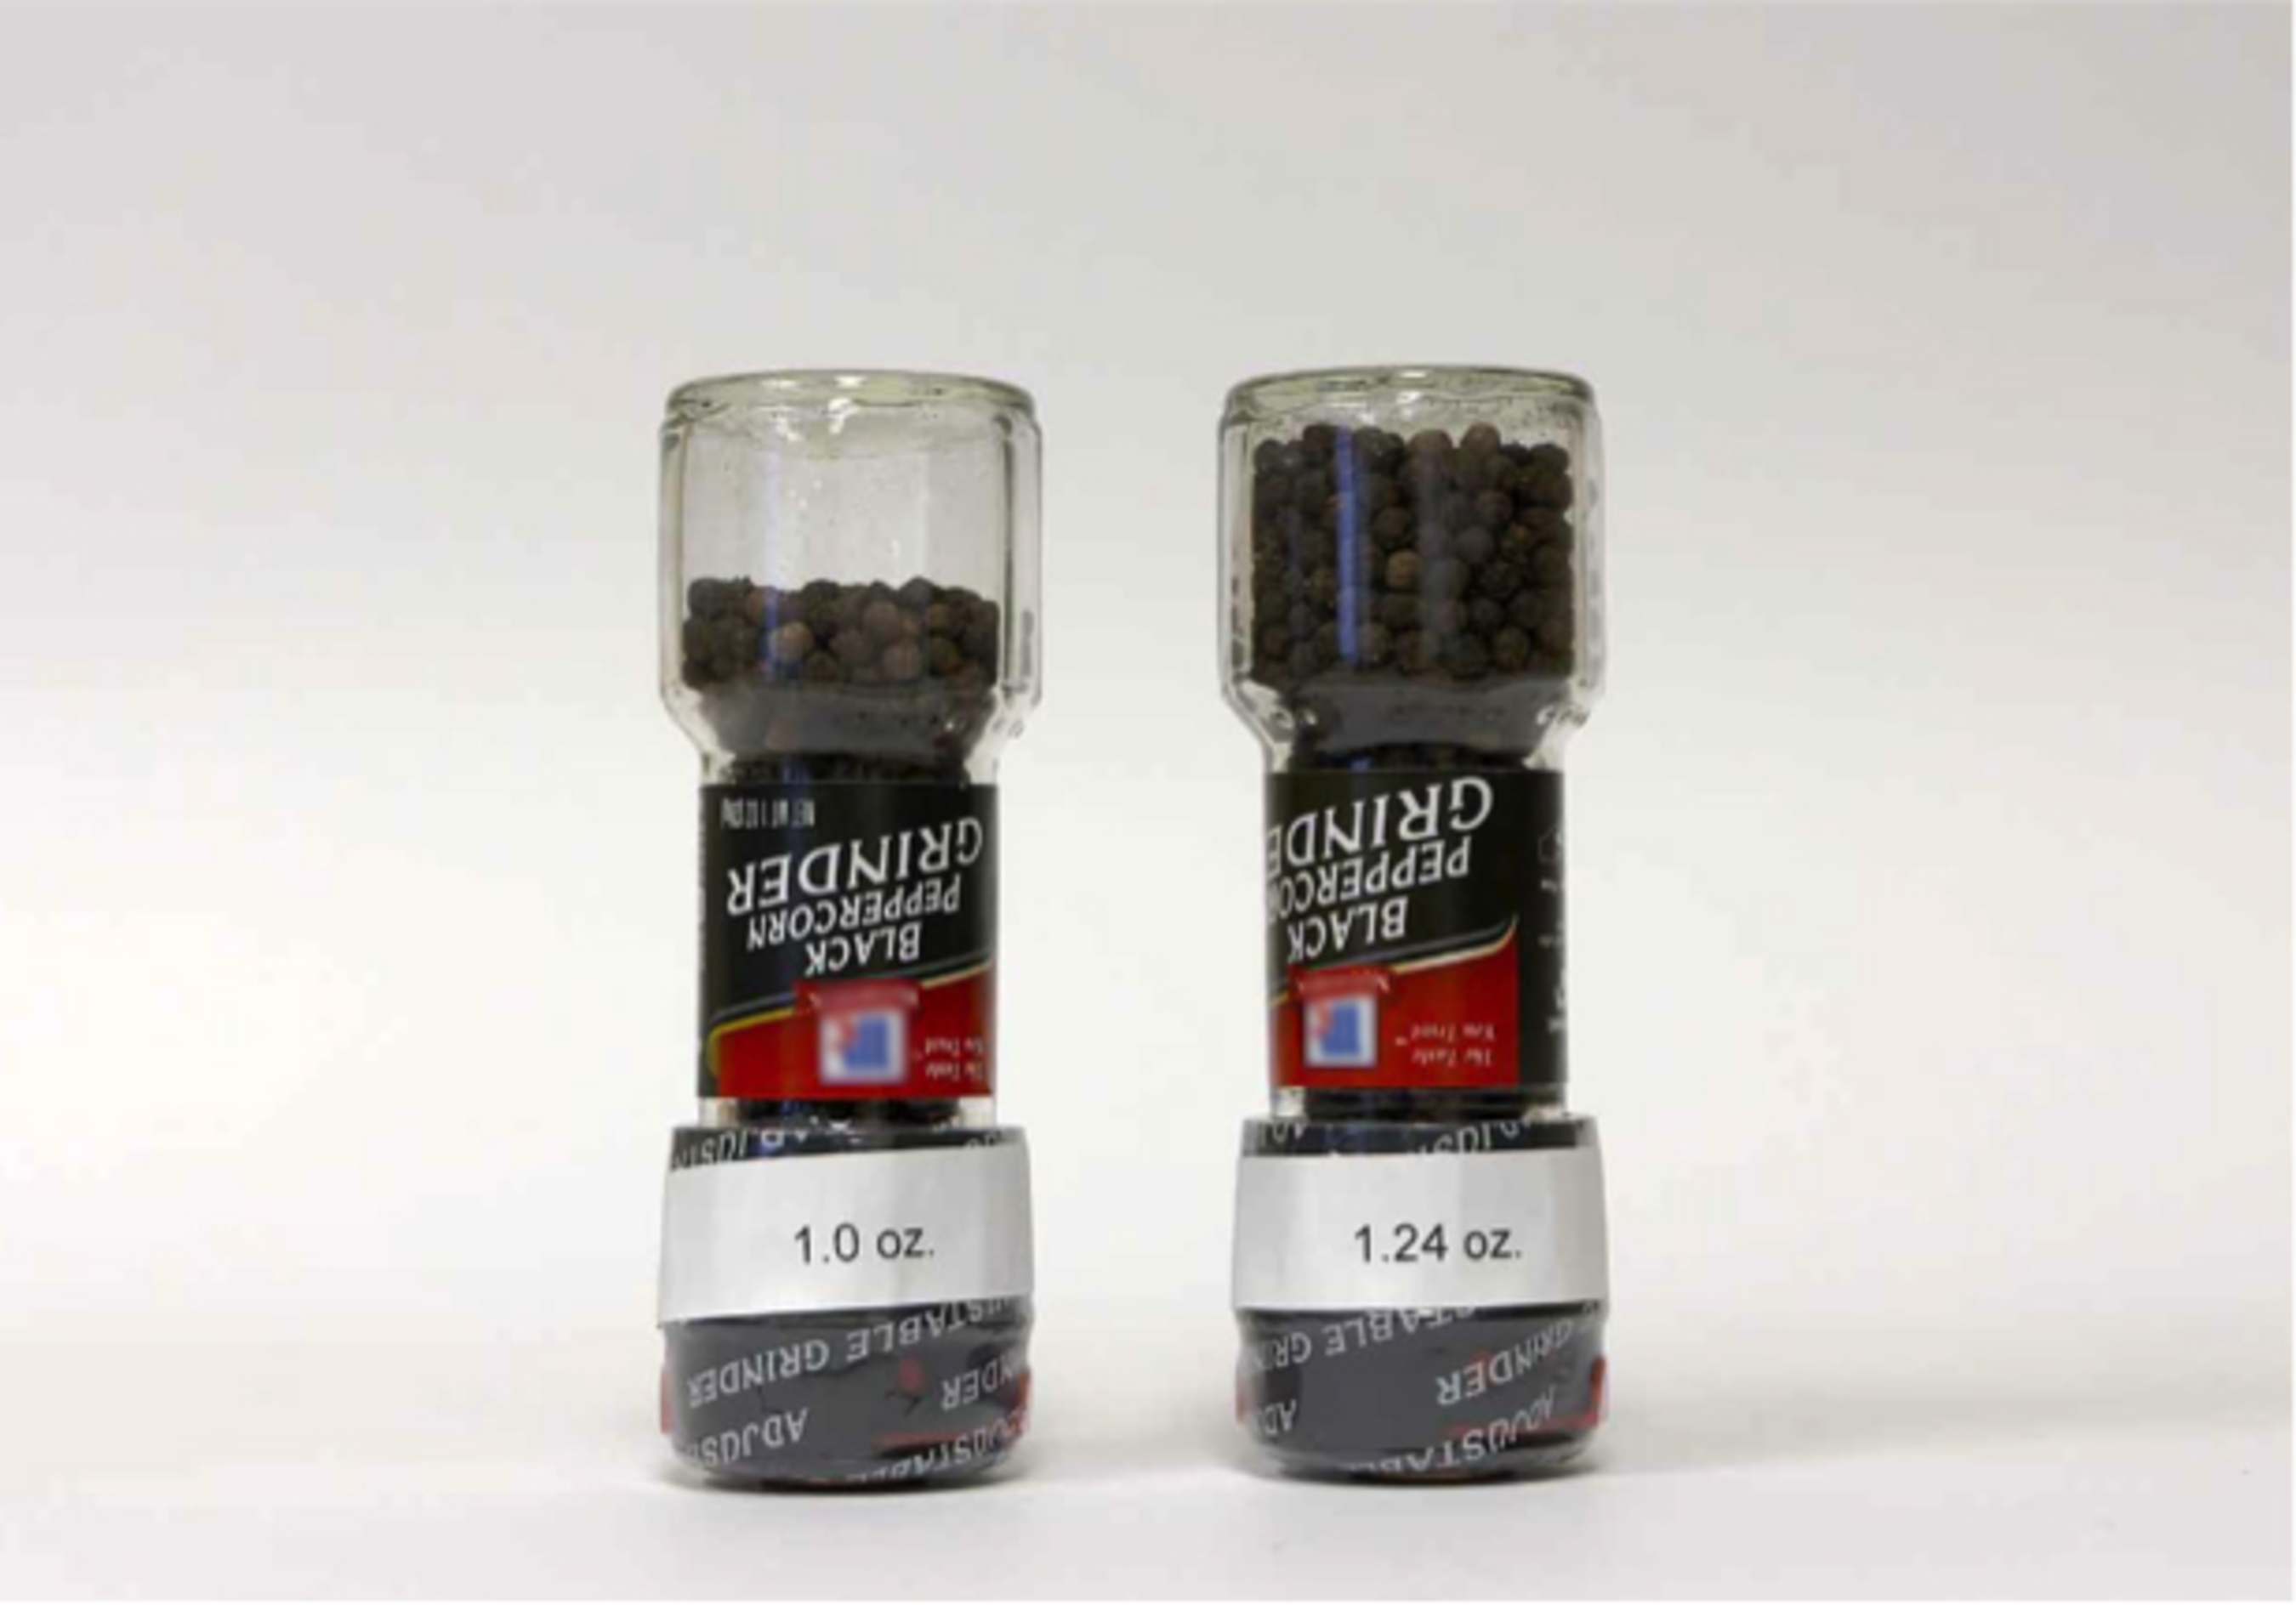 Exhibit C: Photo of the original 1.24 oz. McCormick black peppercorn grinder with full label and the now 20% reduced-size ("slack filled") 1 oz. McCormick black peppercorn grinder with full label in sealed bottles upside down to show "slack fill".